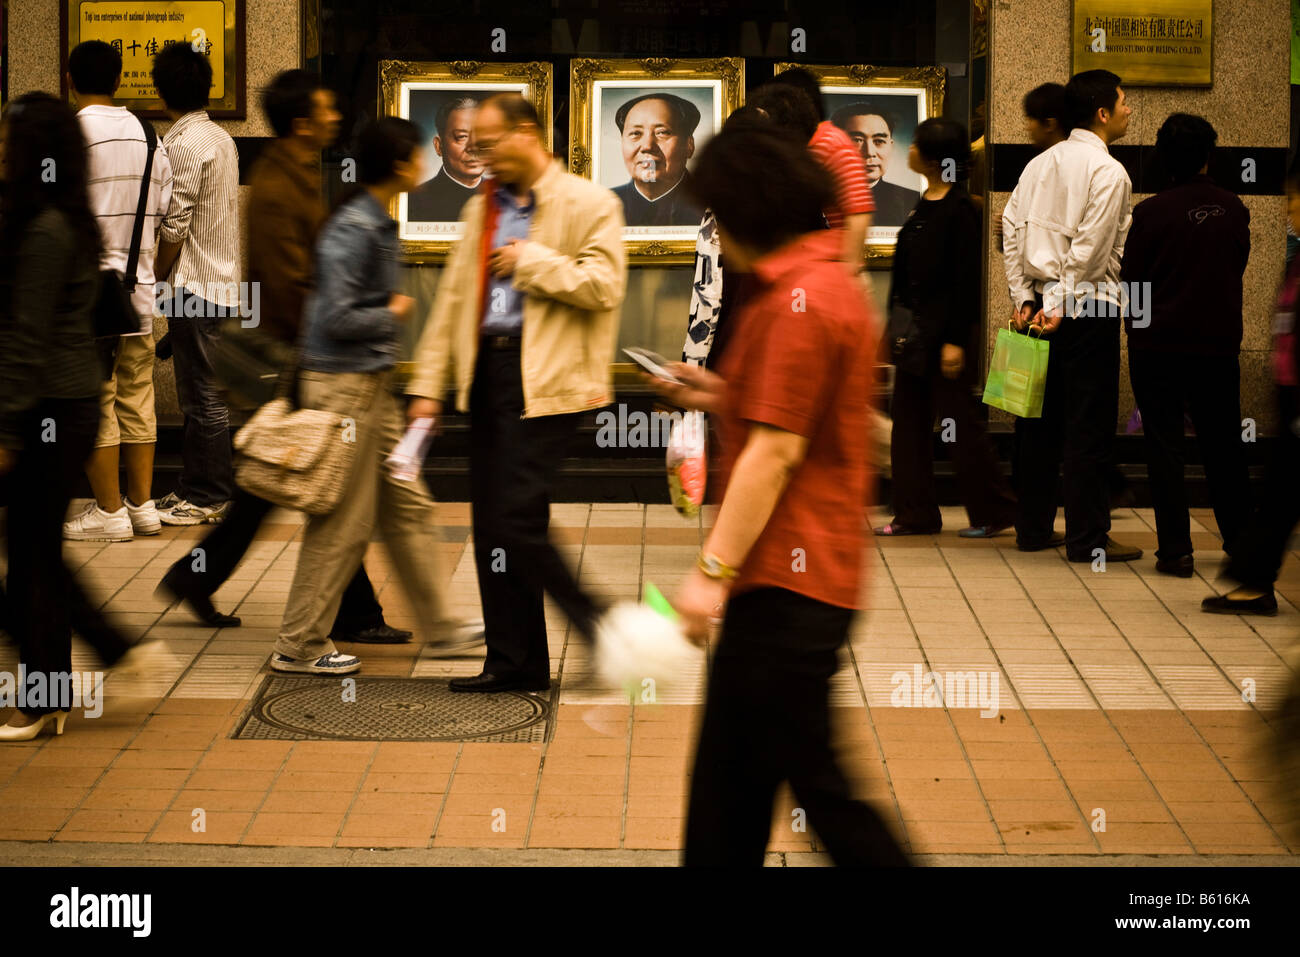 People walk by a portrait of Chairman Mao Zedong in a busy shopping area in Beijing China in April 2008 Stock Photo